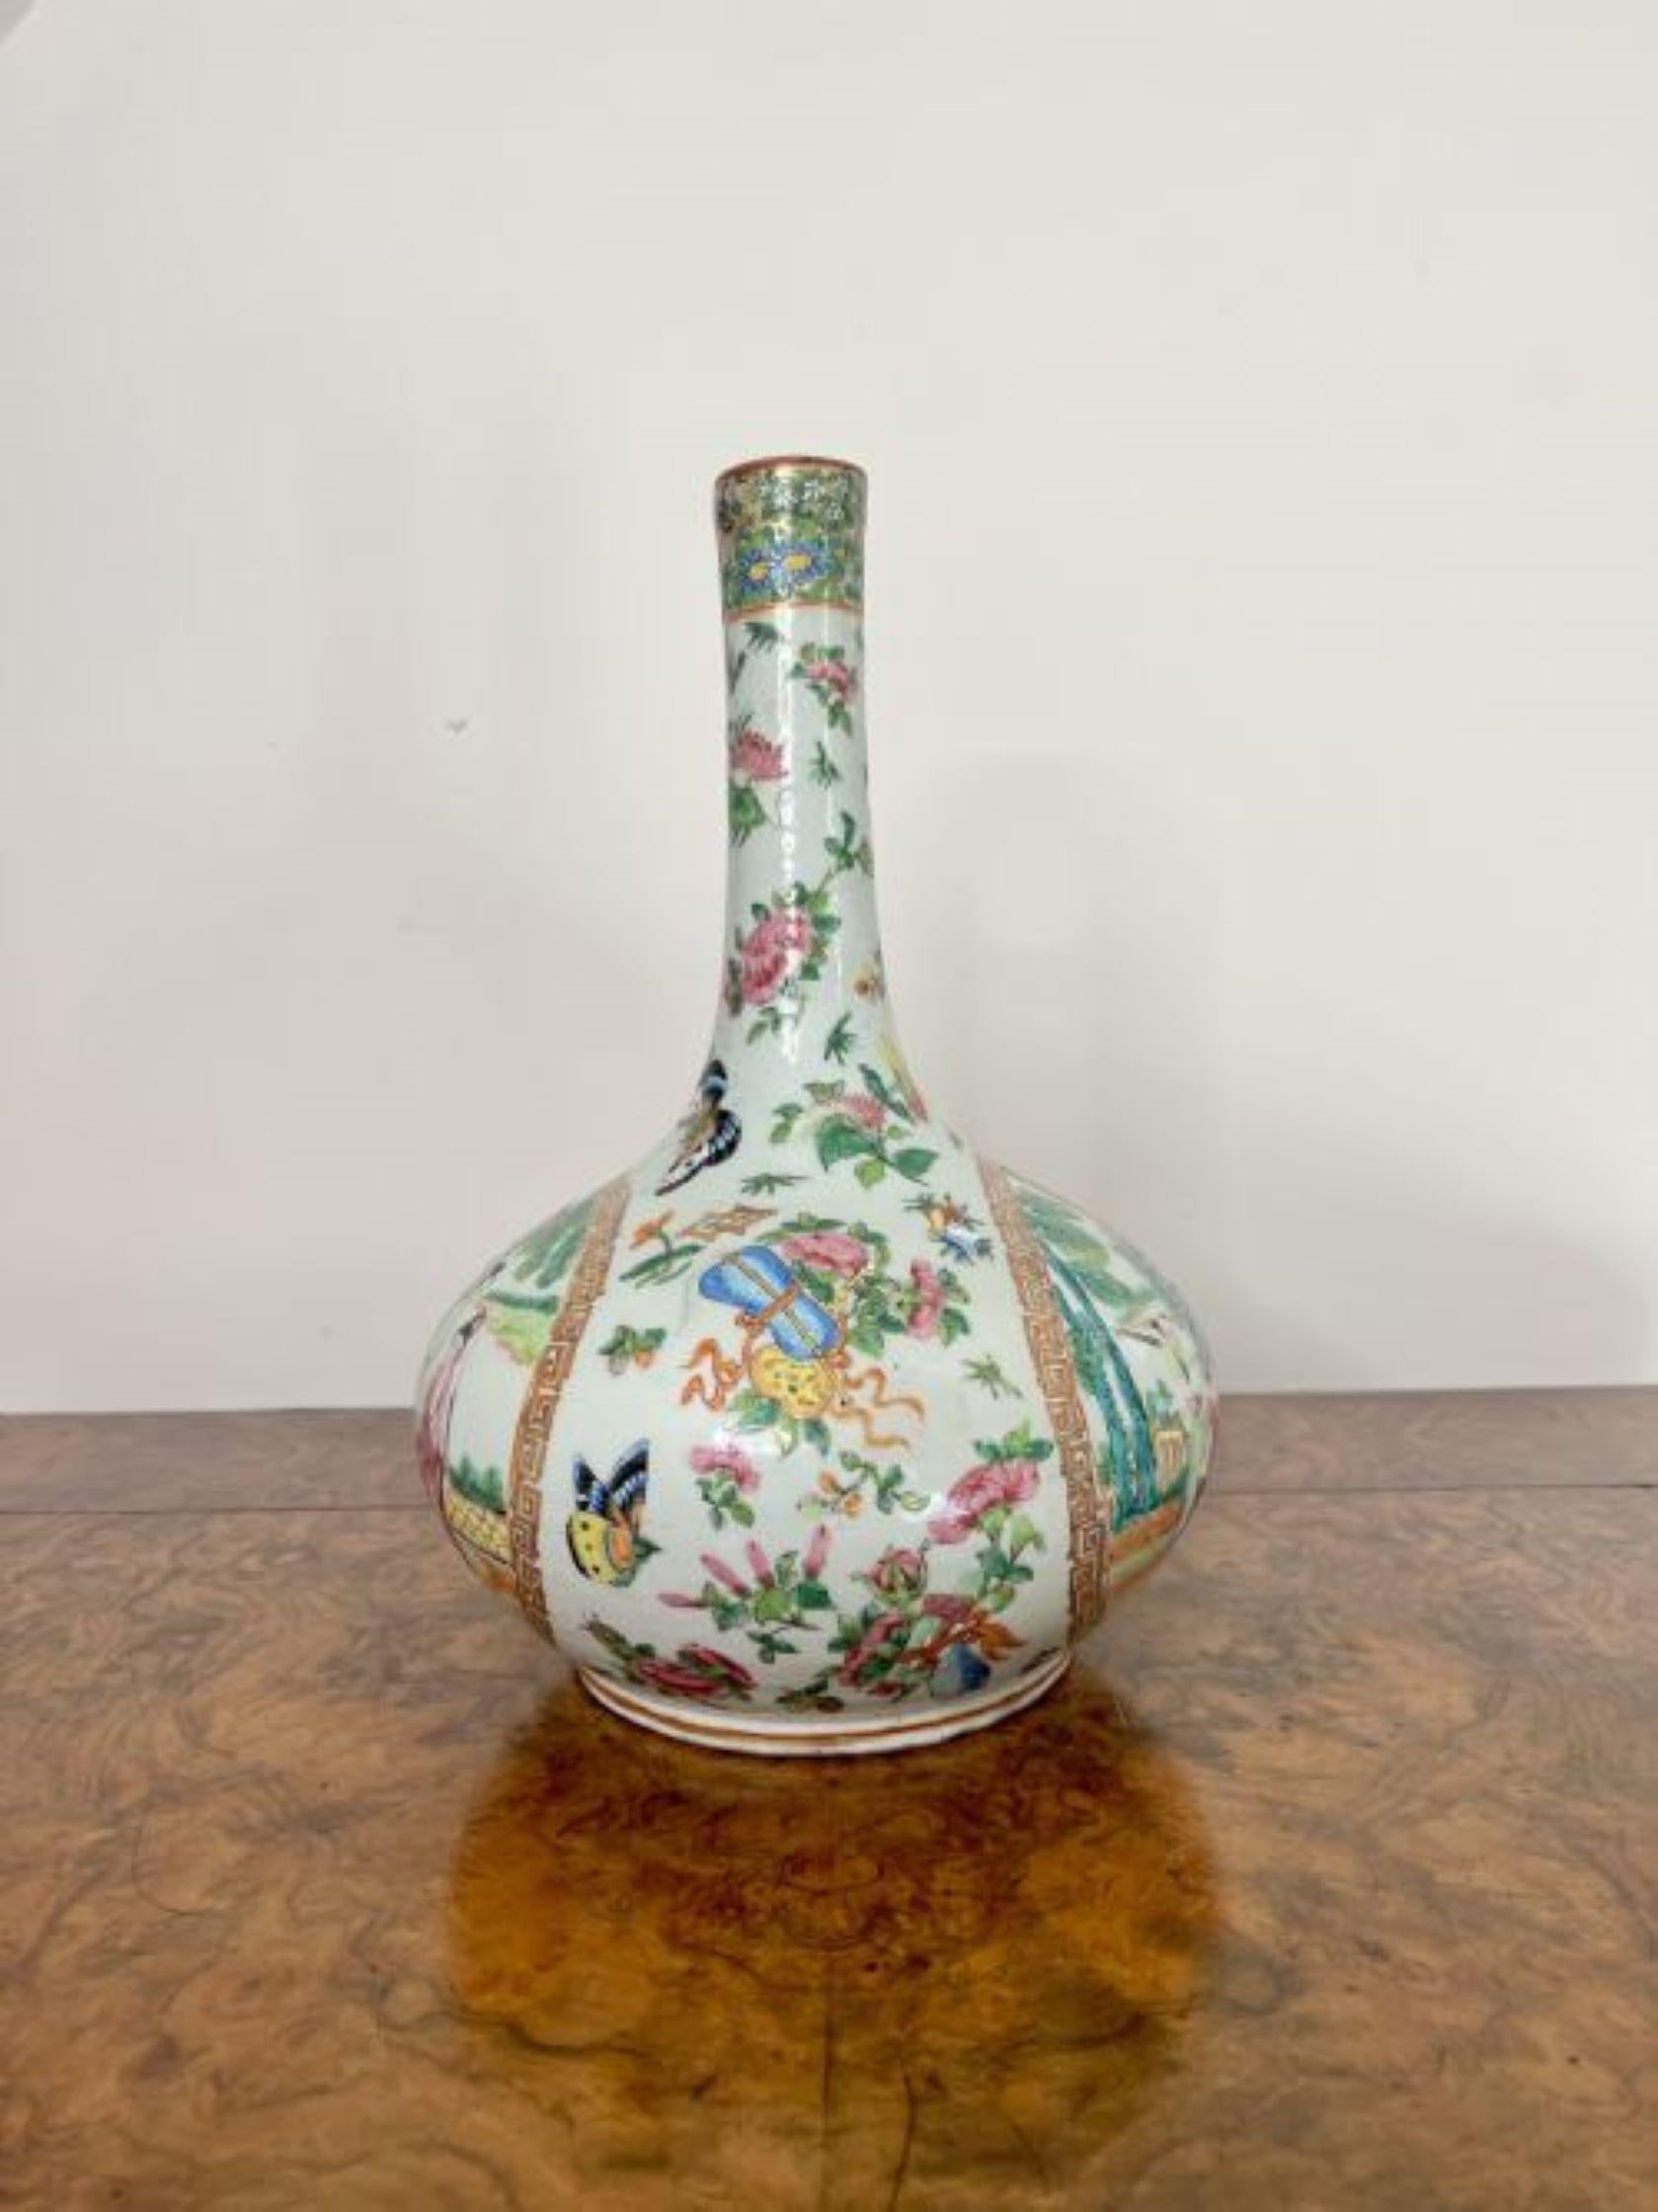 Outstanding quality 19th century large Chinese famille rose vase decorated with two large panels showing numerous figures in traditional clothing within a court setting, profusely and beautifully detailed with birds, butterflies, flowers and fruit